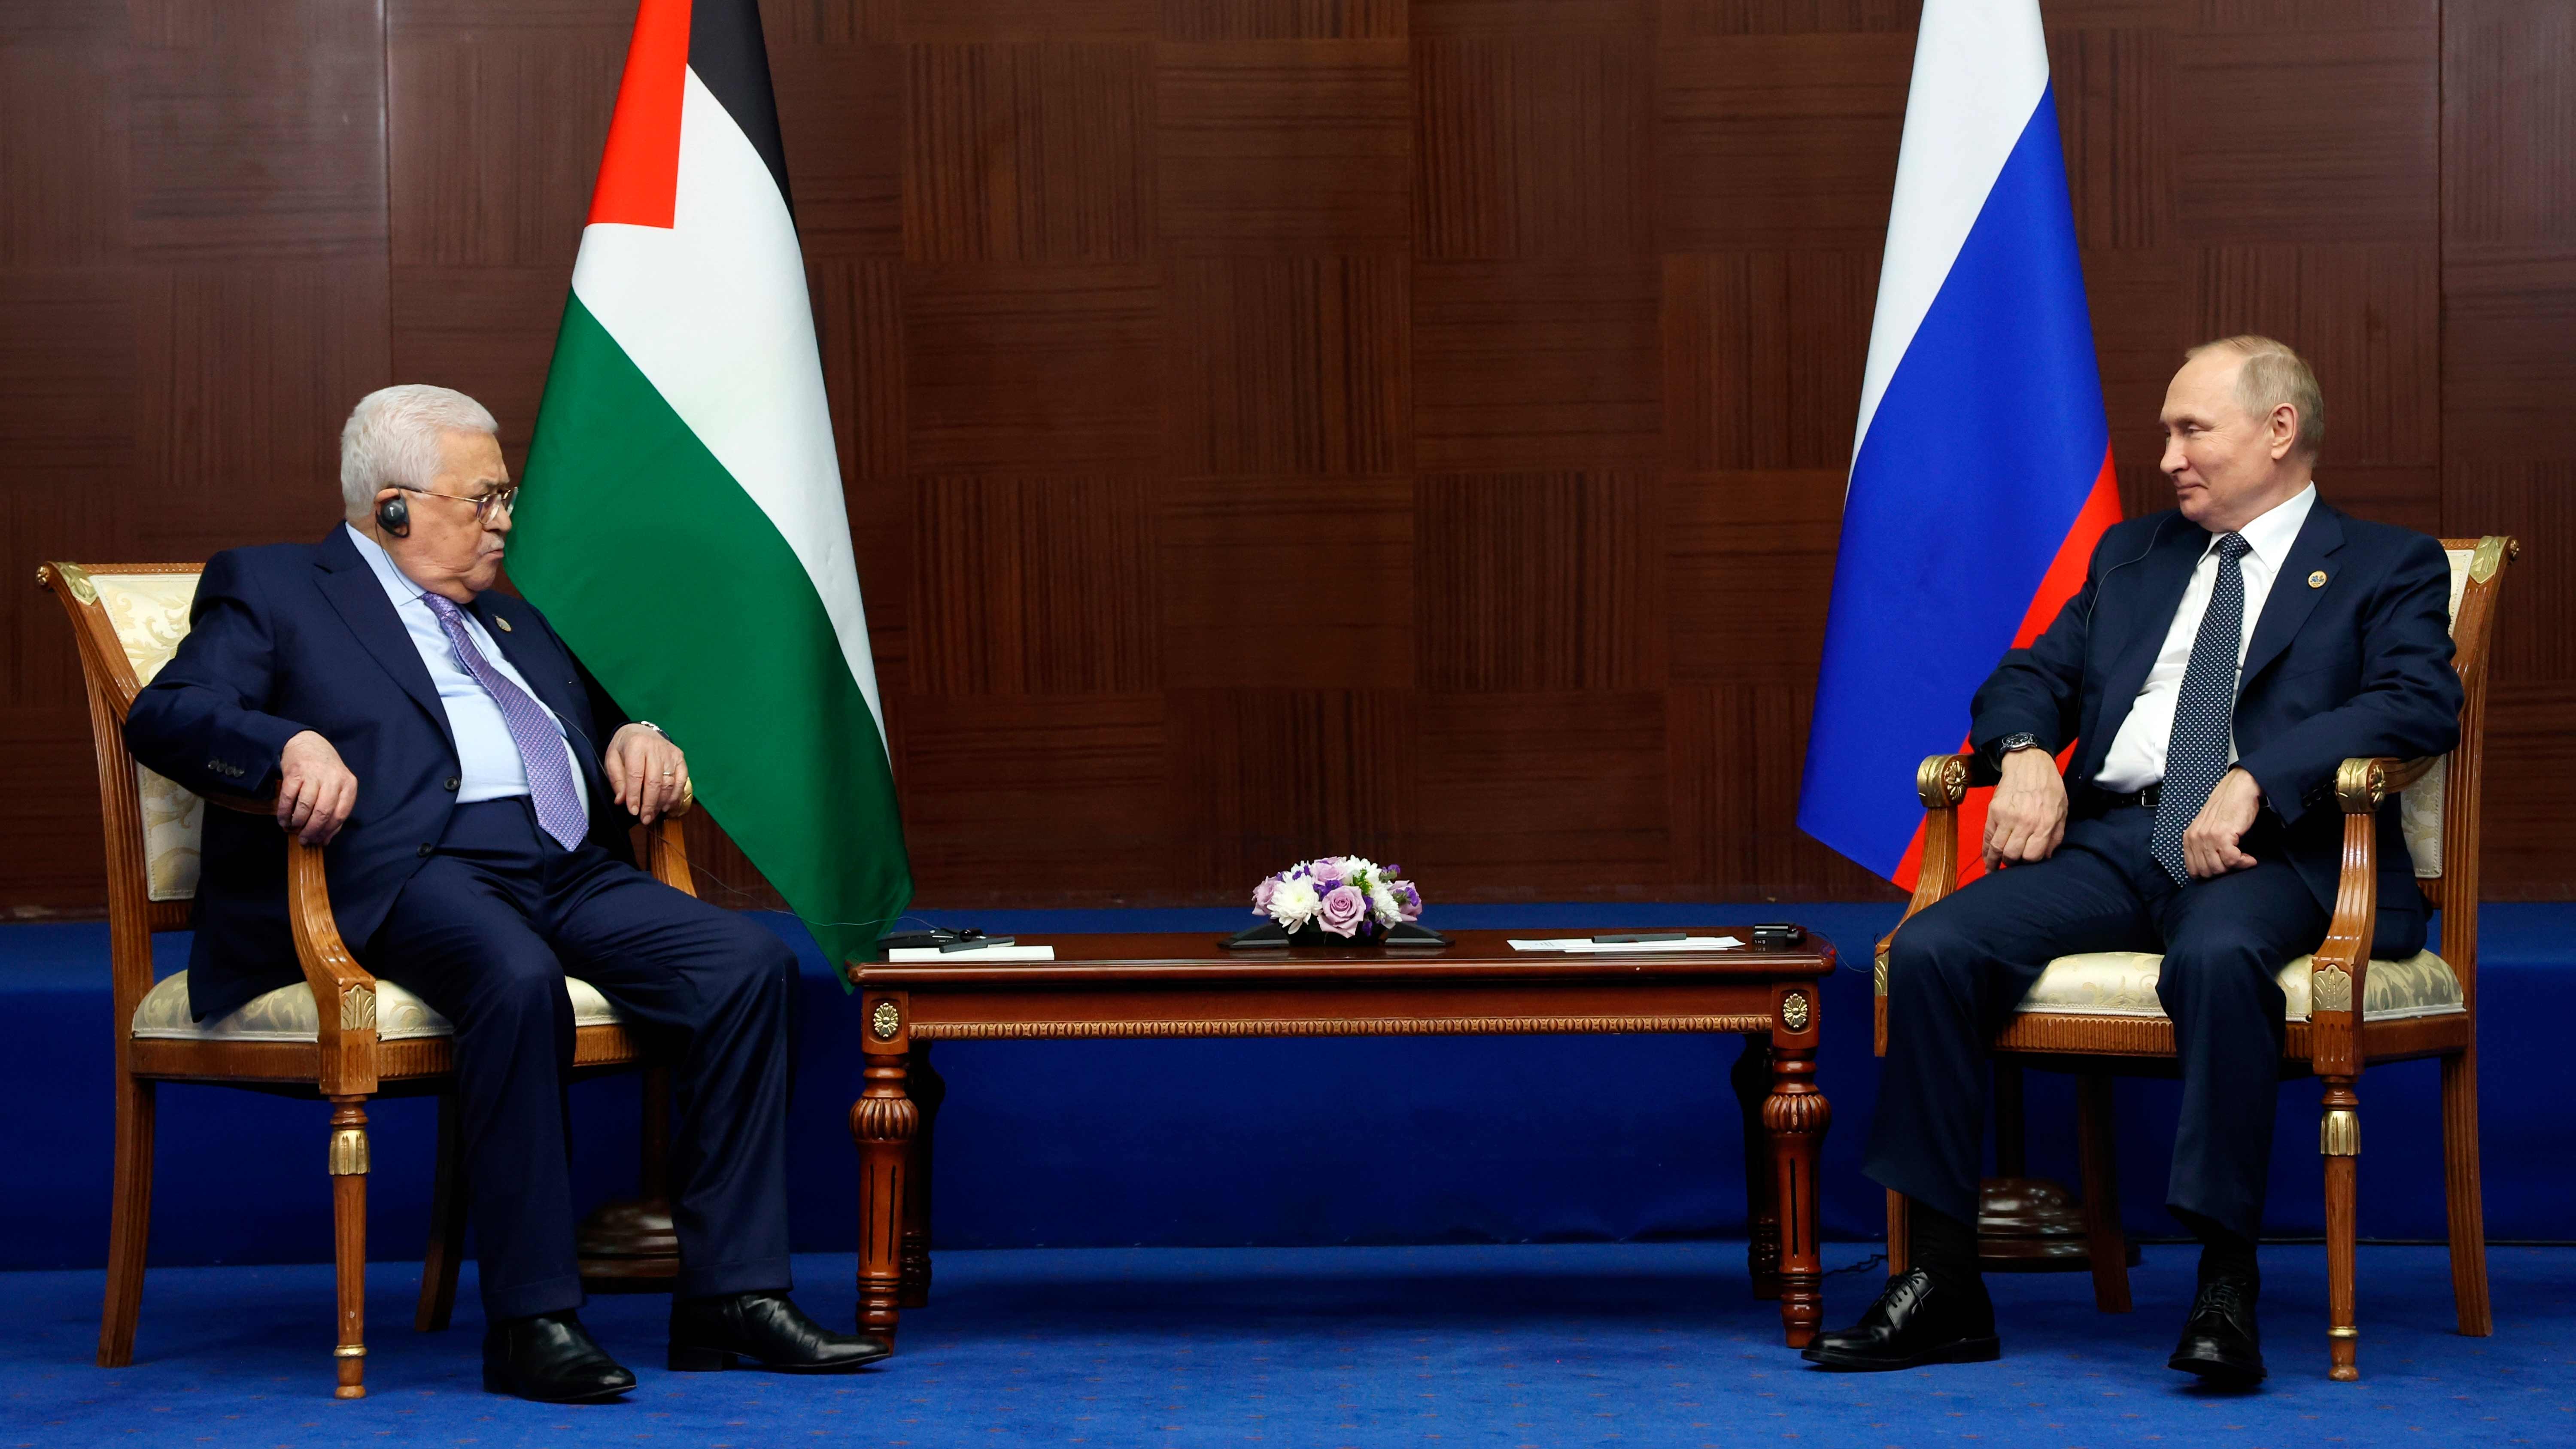 Palestinian president, in front of Putin, rules out US as Mideast peace mediator during speech